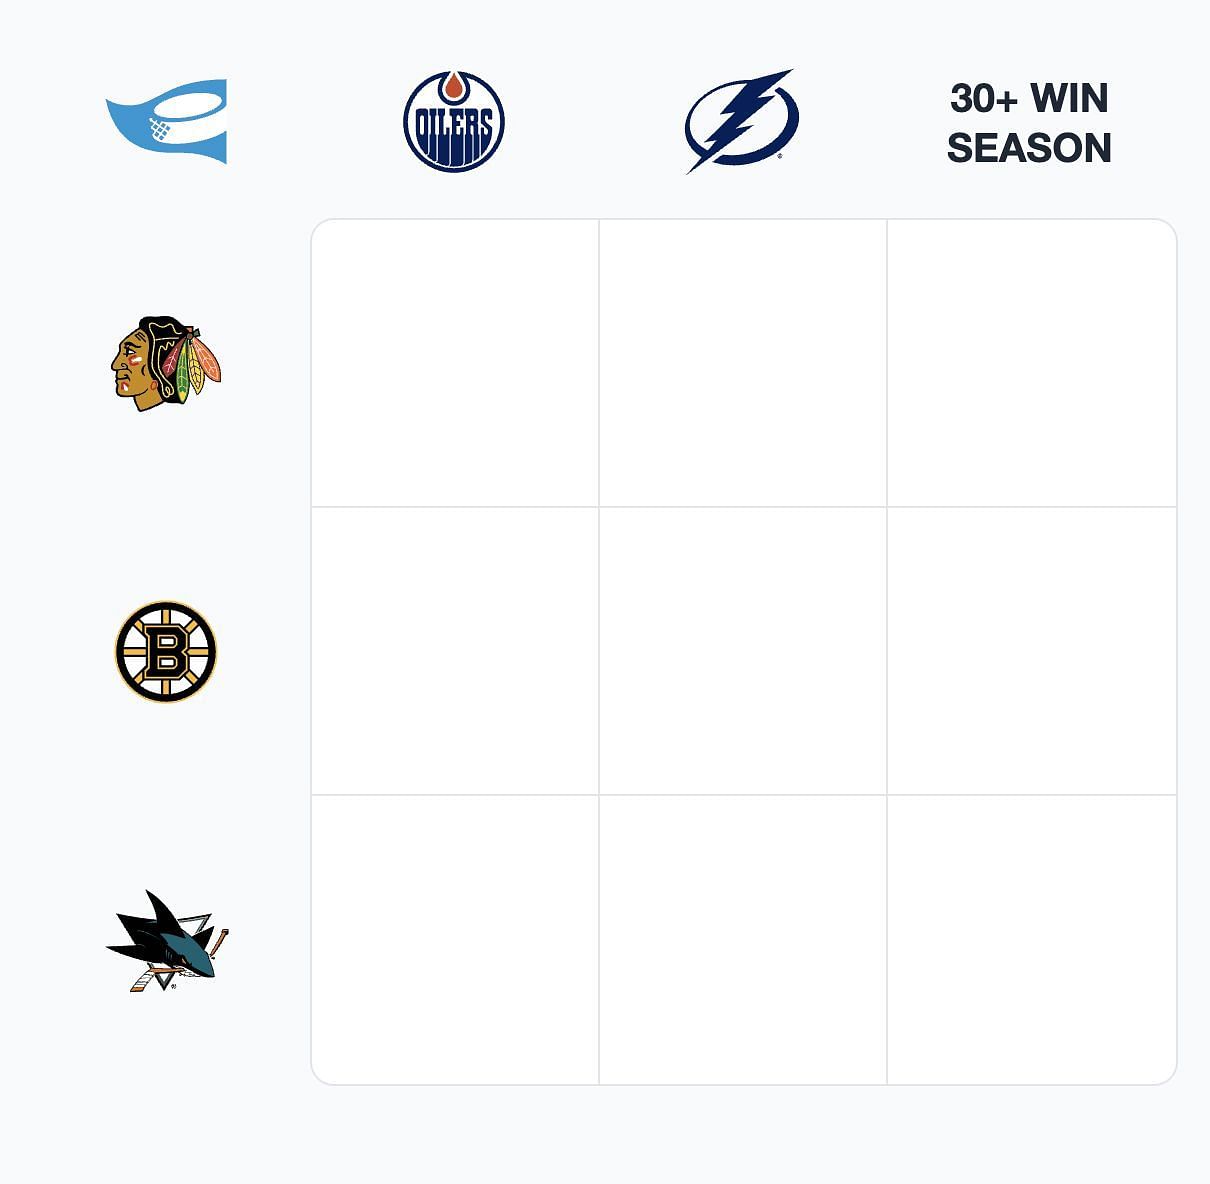 NHL Immaculate Grid answers for September 1